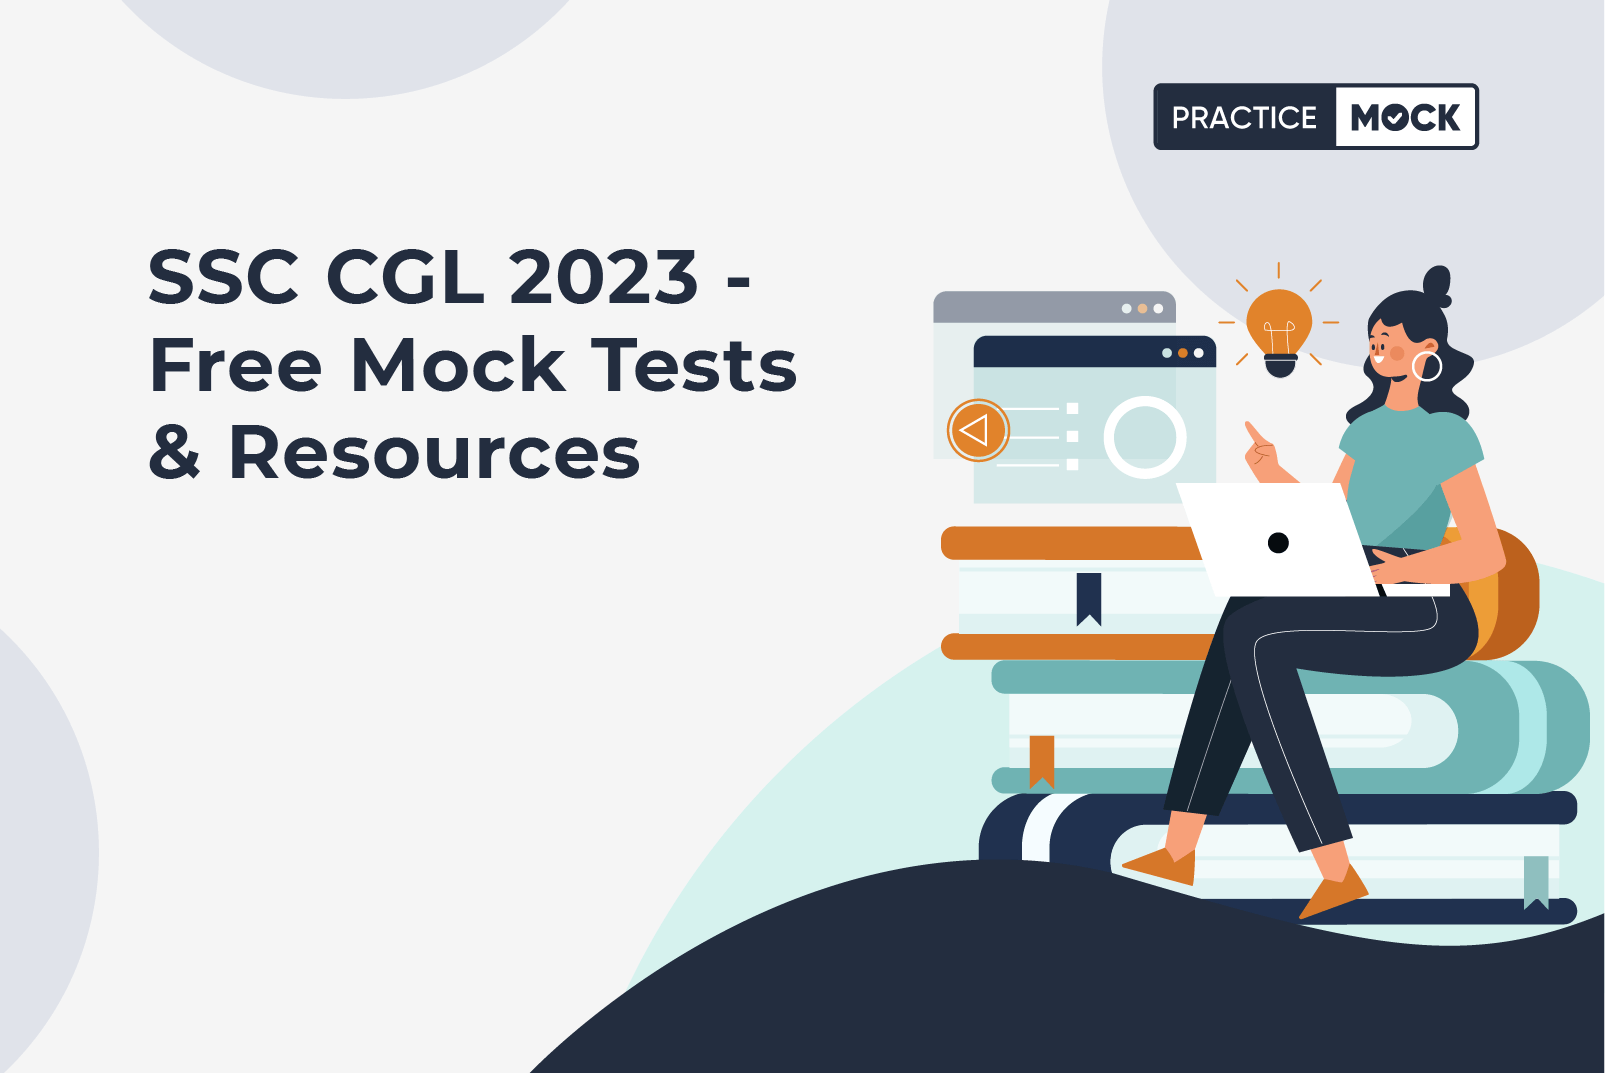 SSC CGL 2023 - Free Mock Tests & Resources